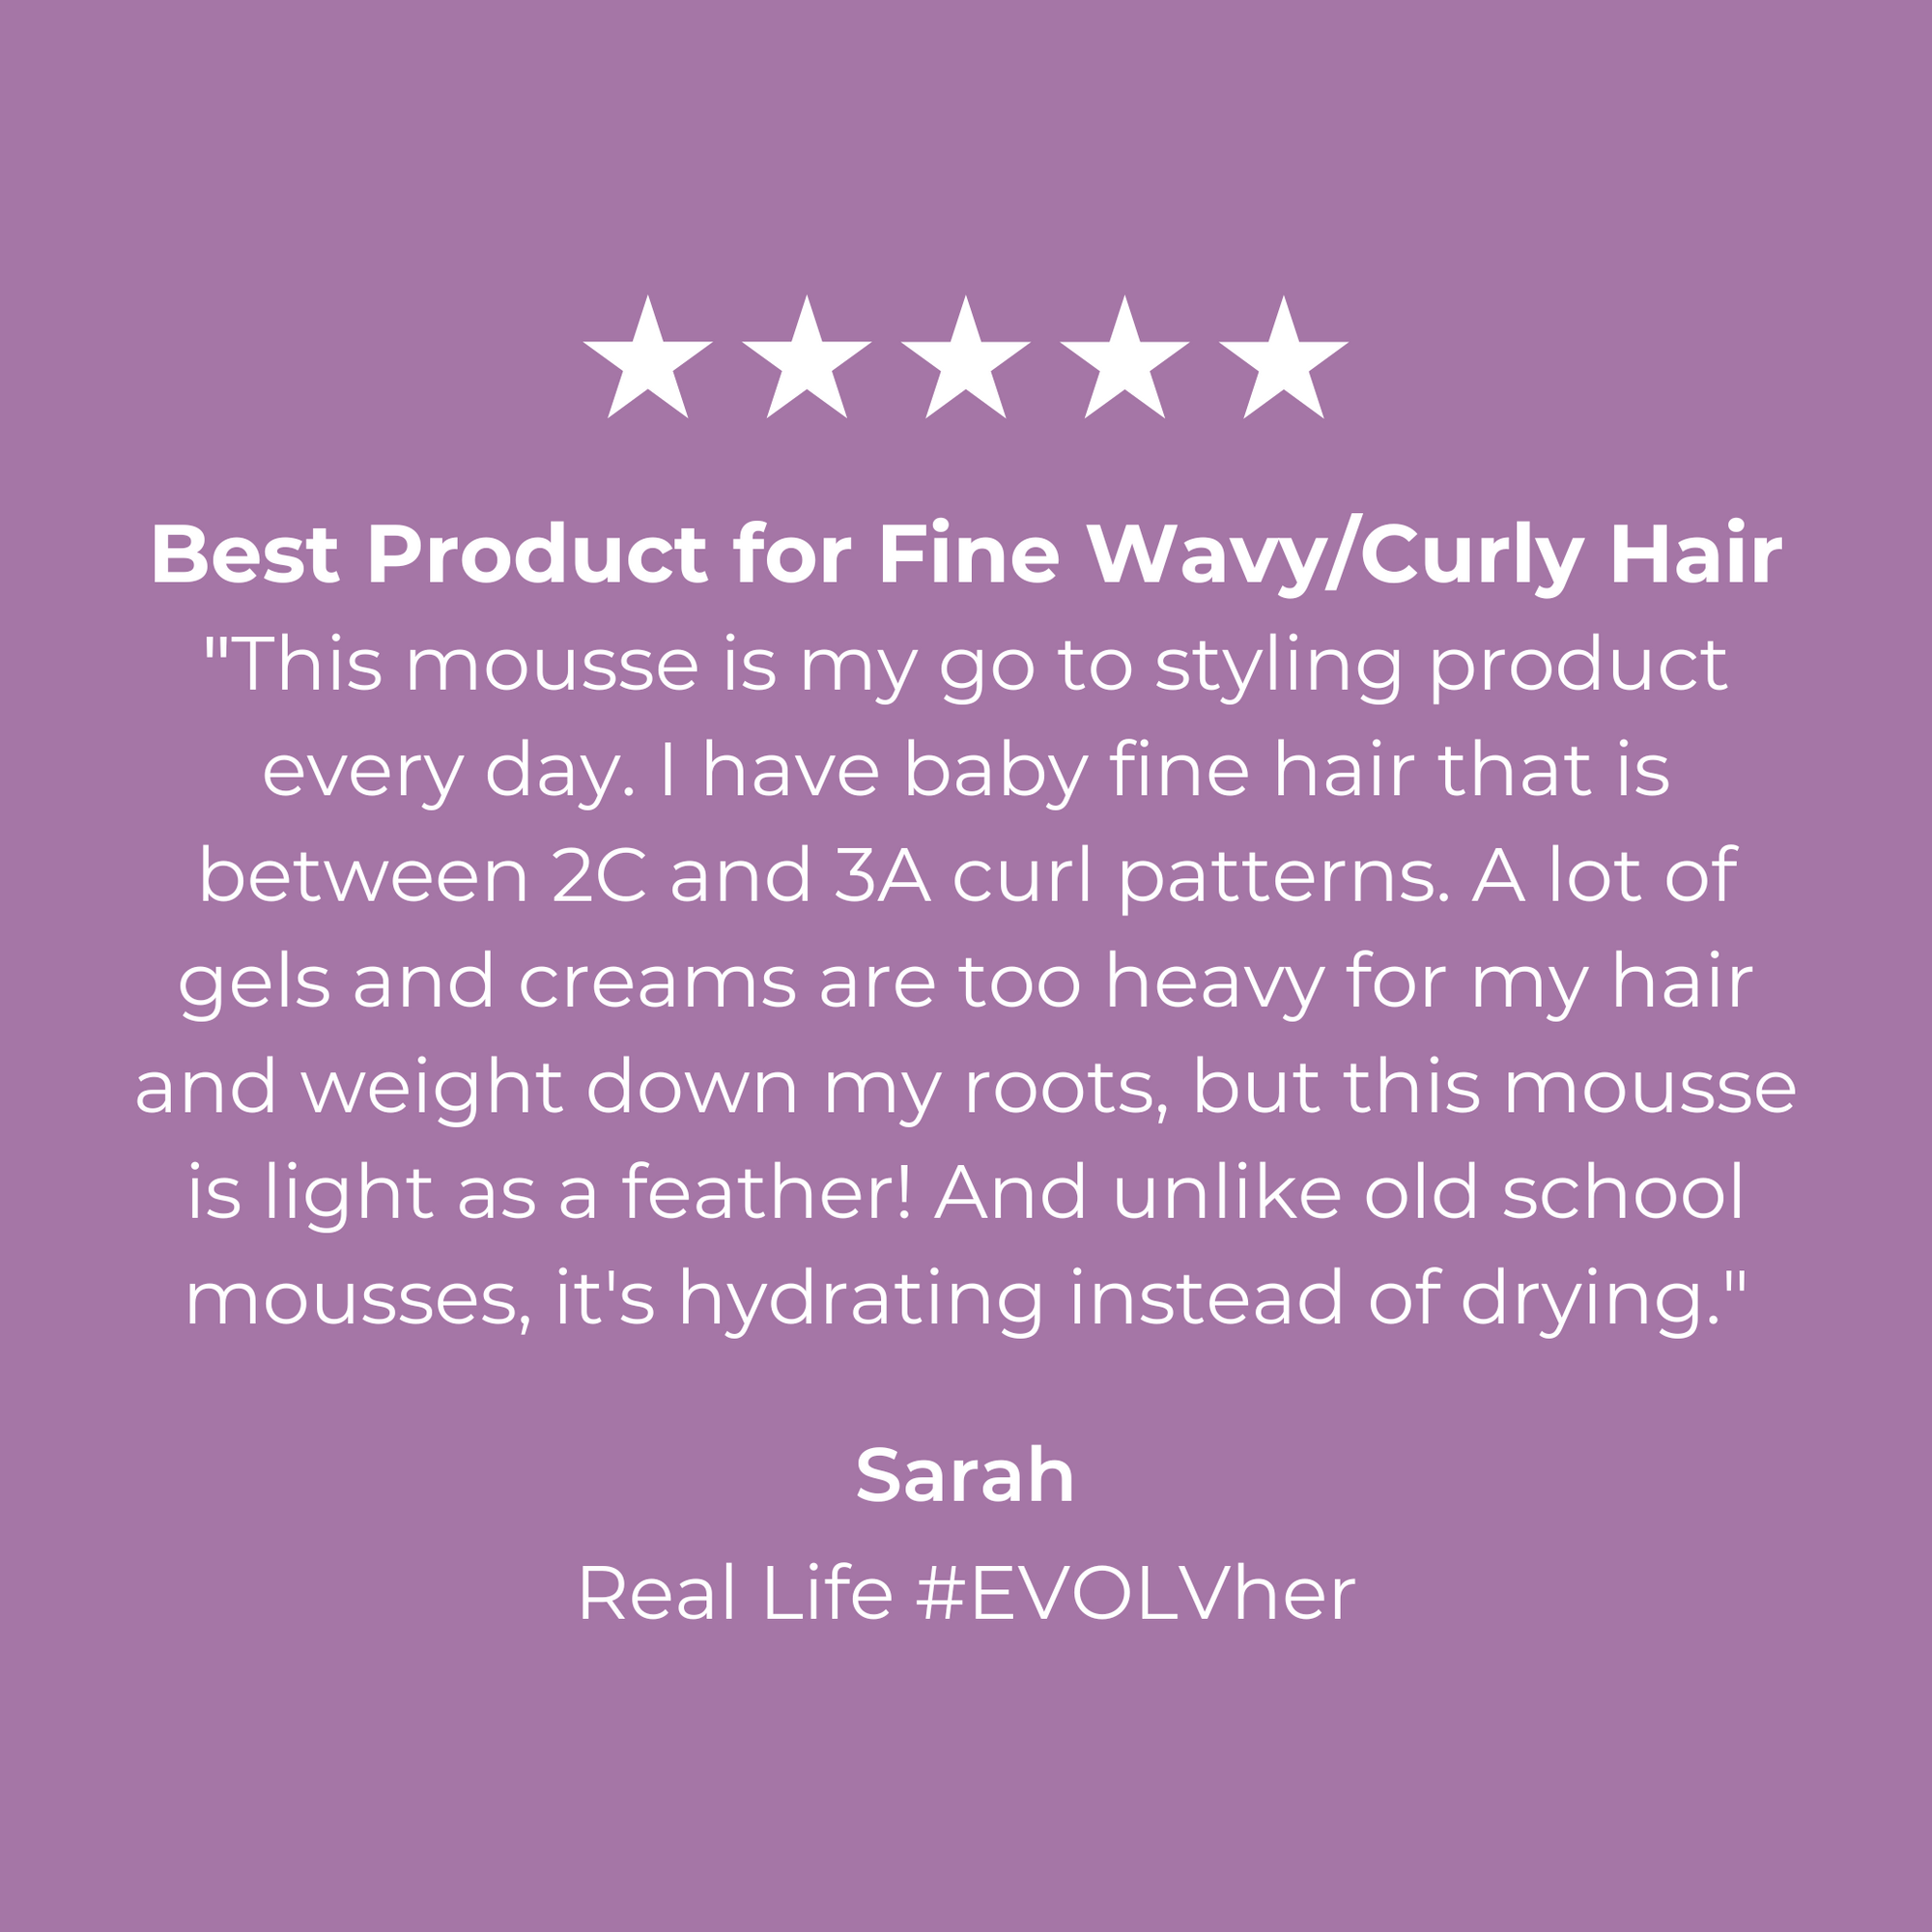 Elevate your hair styles with our Mini Mousse+ Volumizing Foam